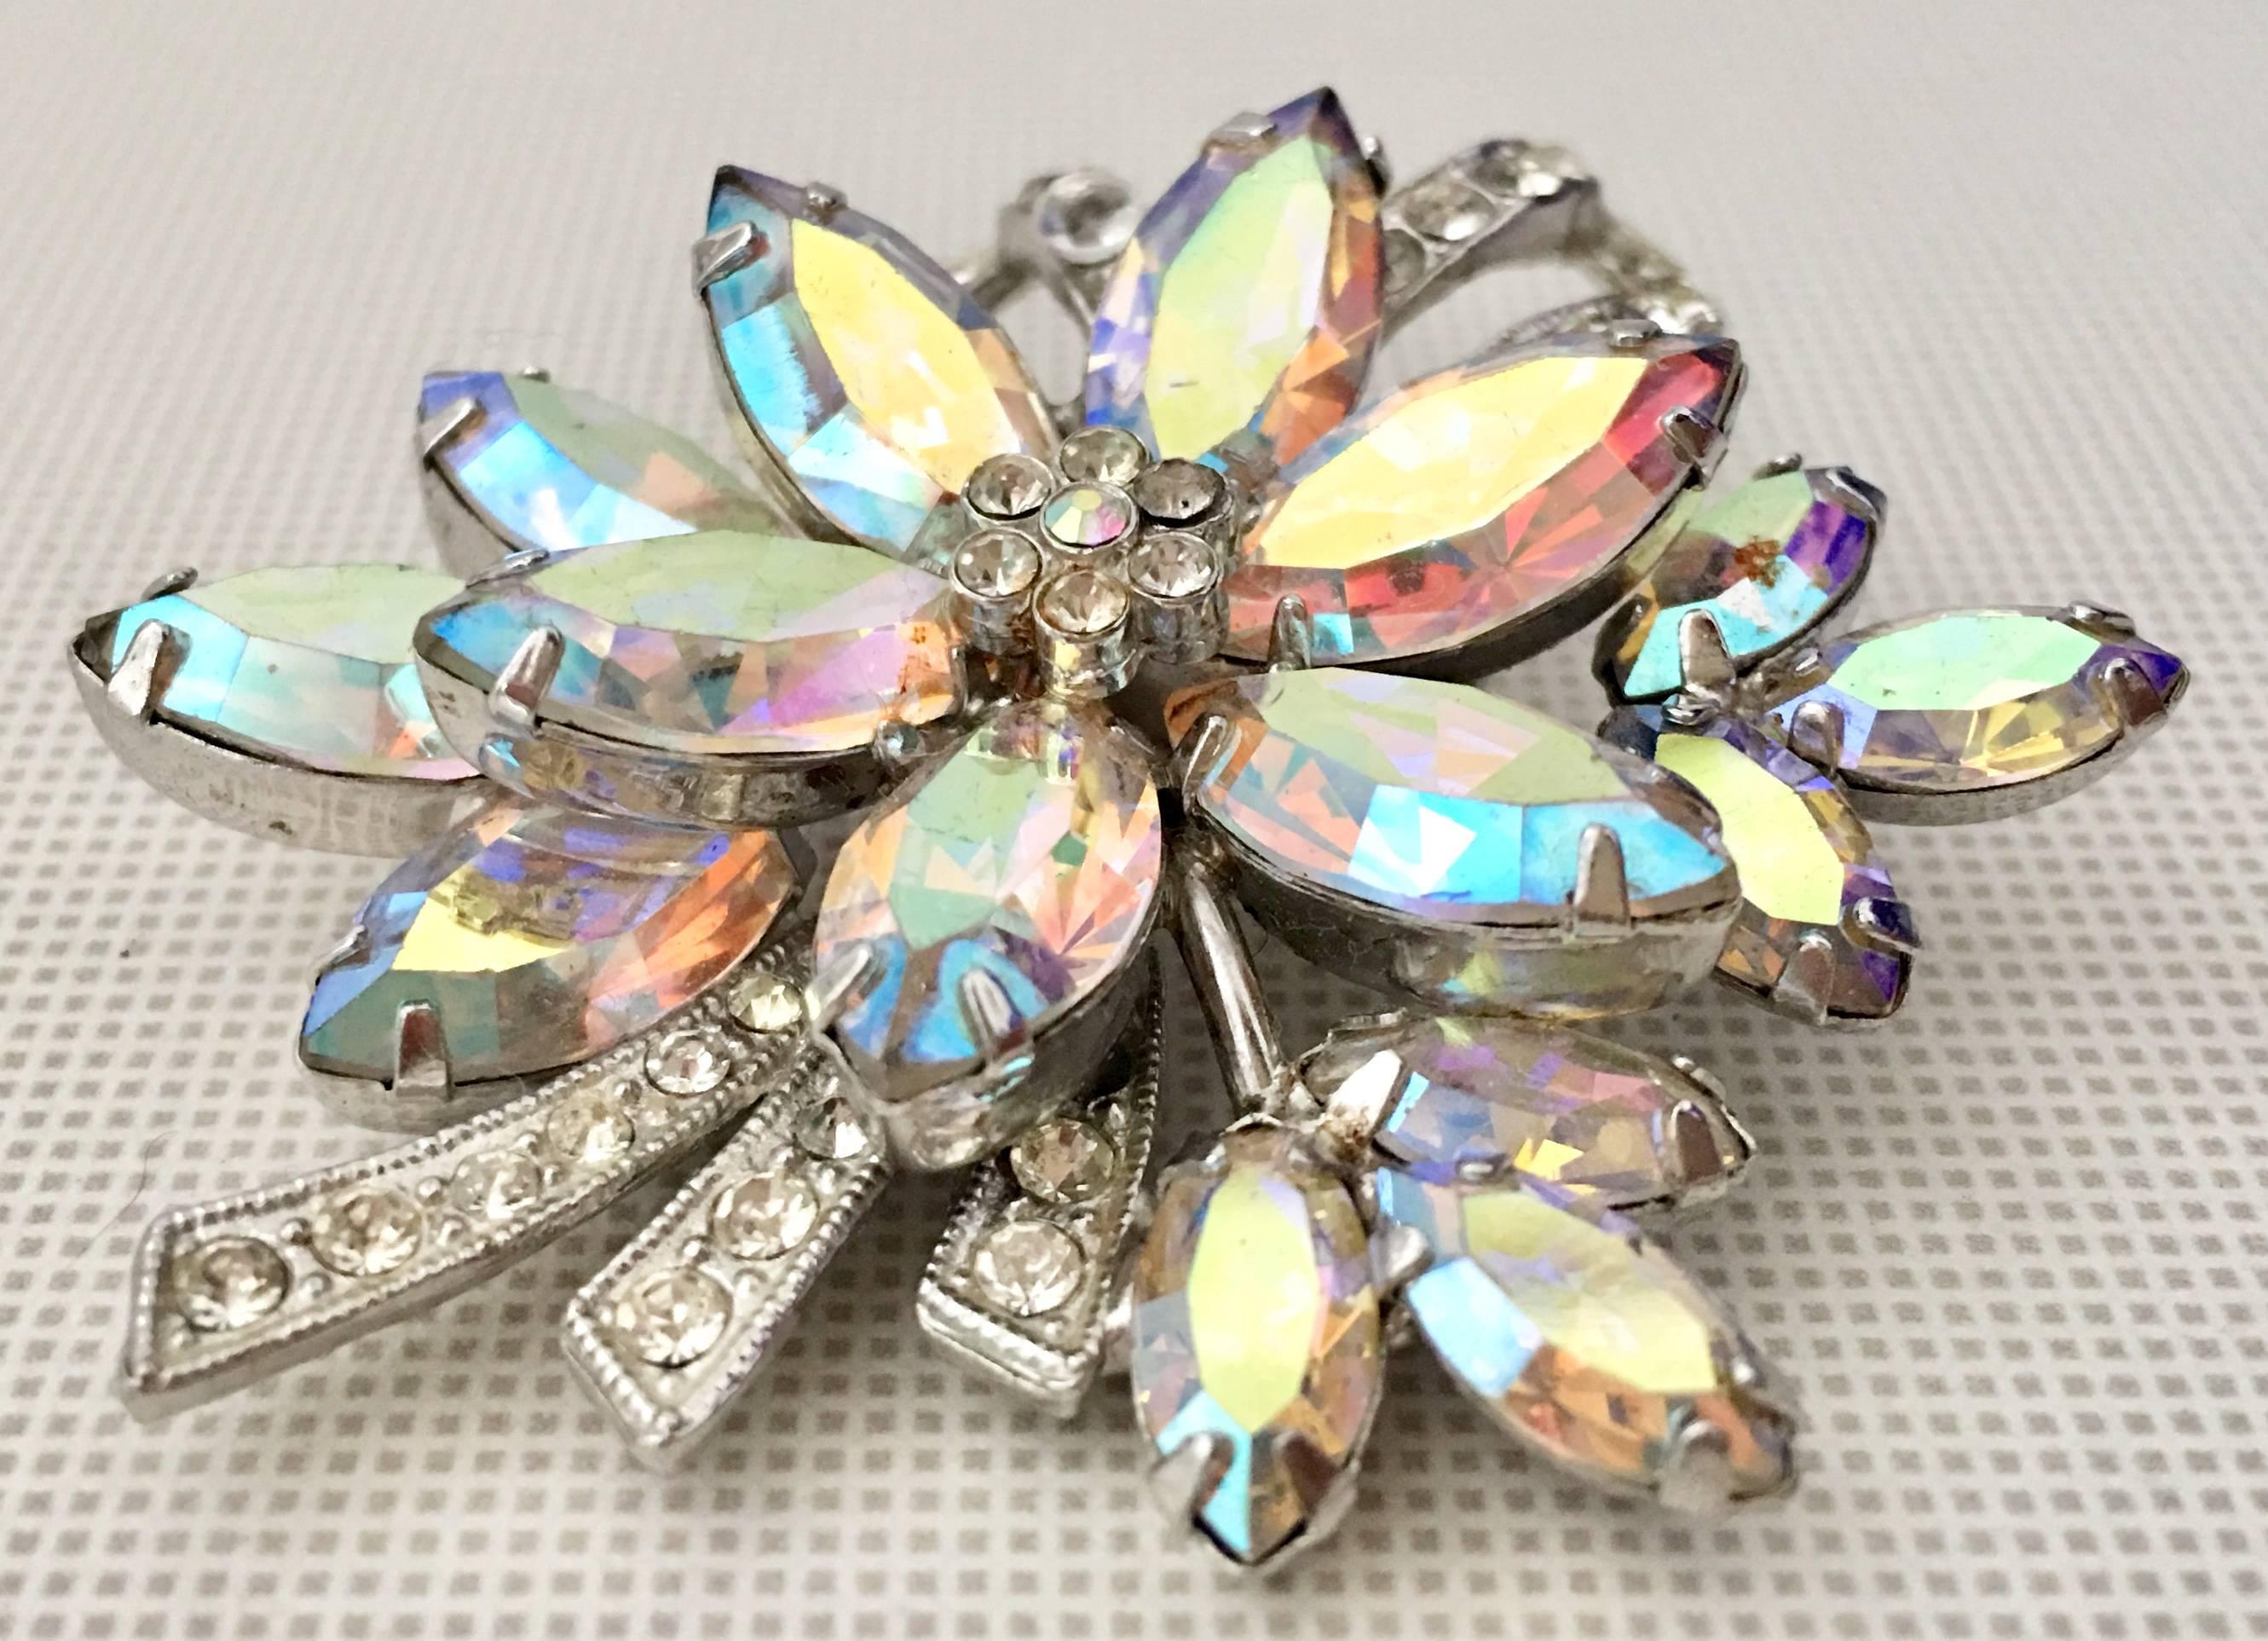 Vintage Aurora Borealis & Crystal Clear Austrian Crystal Rhinestone Dimensional Flower Brooch By, Weiss. This dimensional flower brooch features silver rhodium plate prong set rhinestones and is signed on the underside, Weiss.